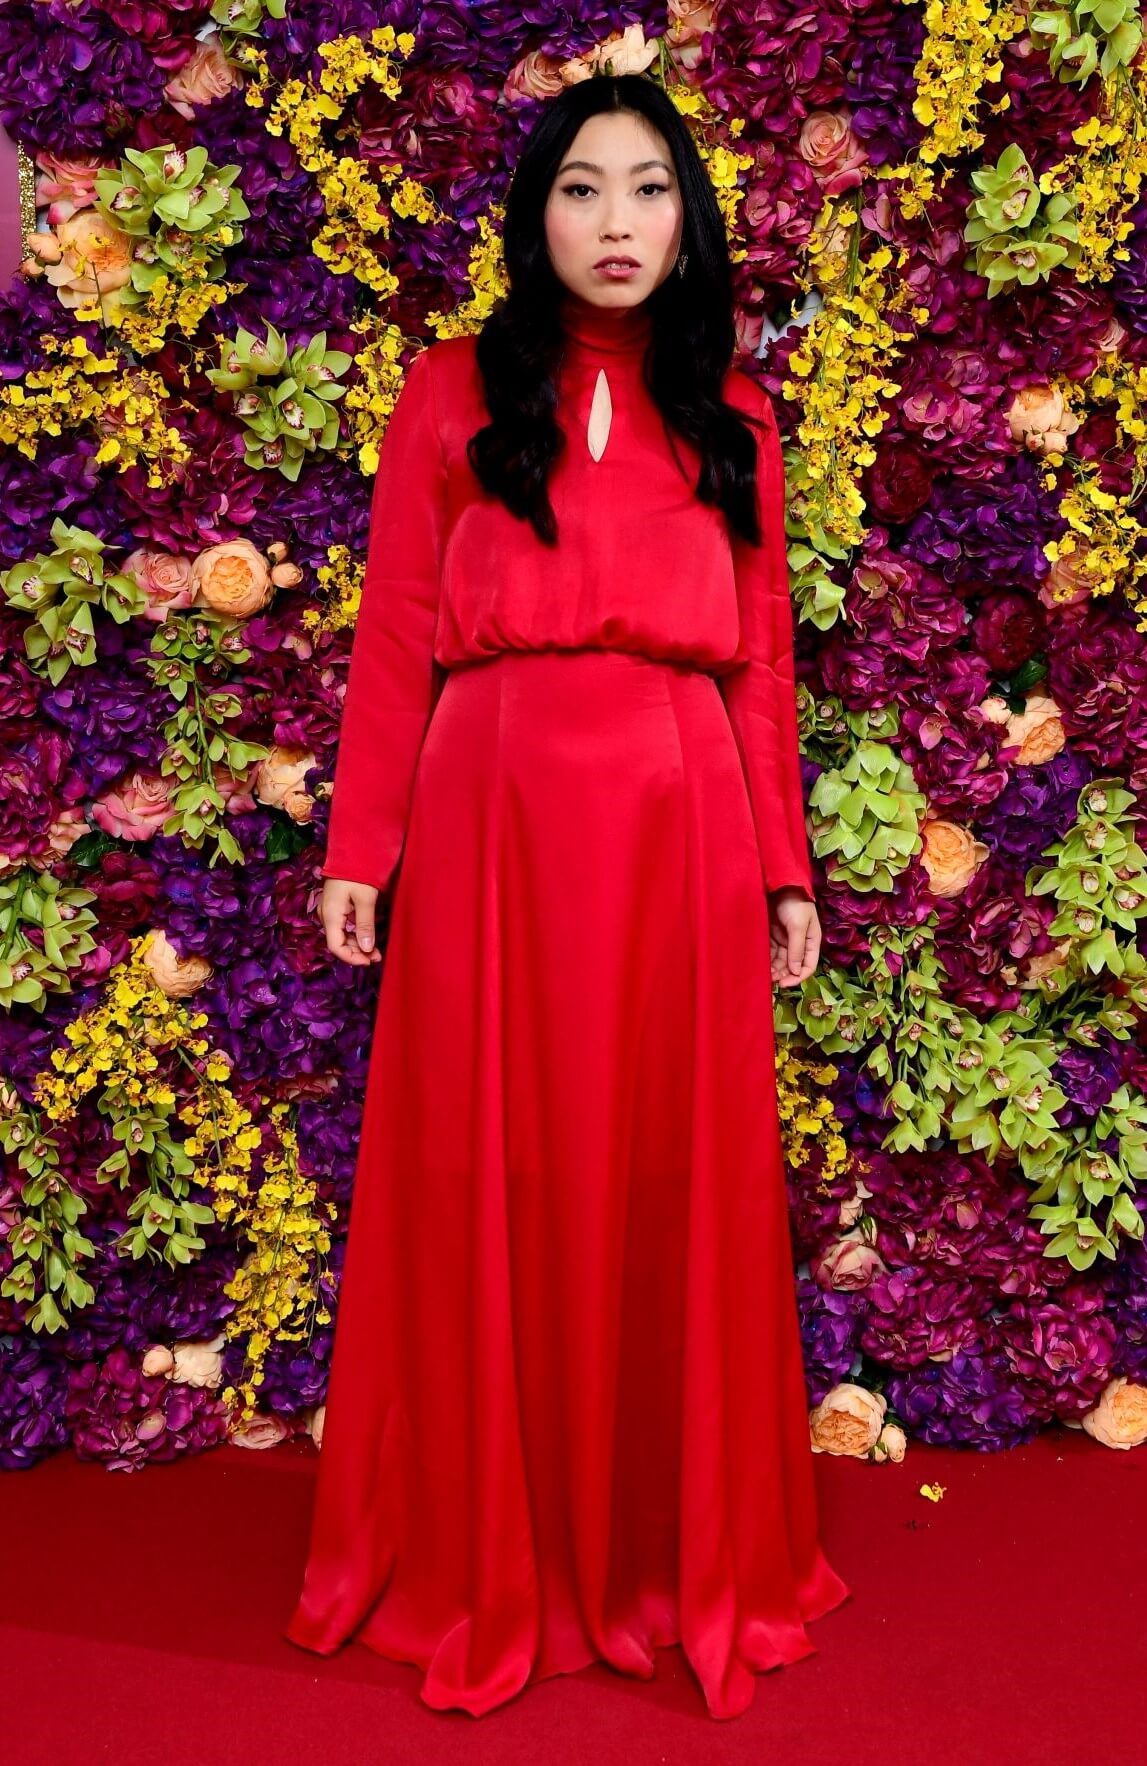 Awkwafina In Red Full Sleeves Long Gown At “Crazy Rich Asians” Premiere in London